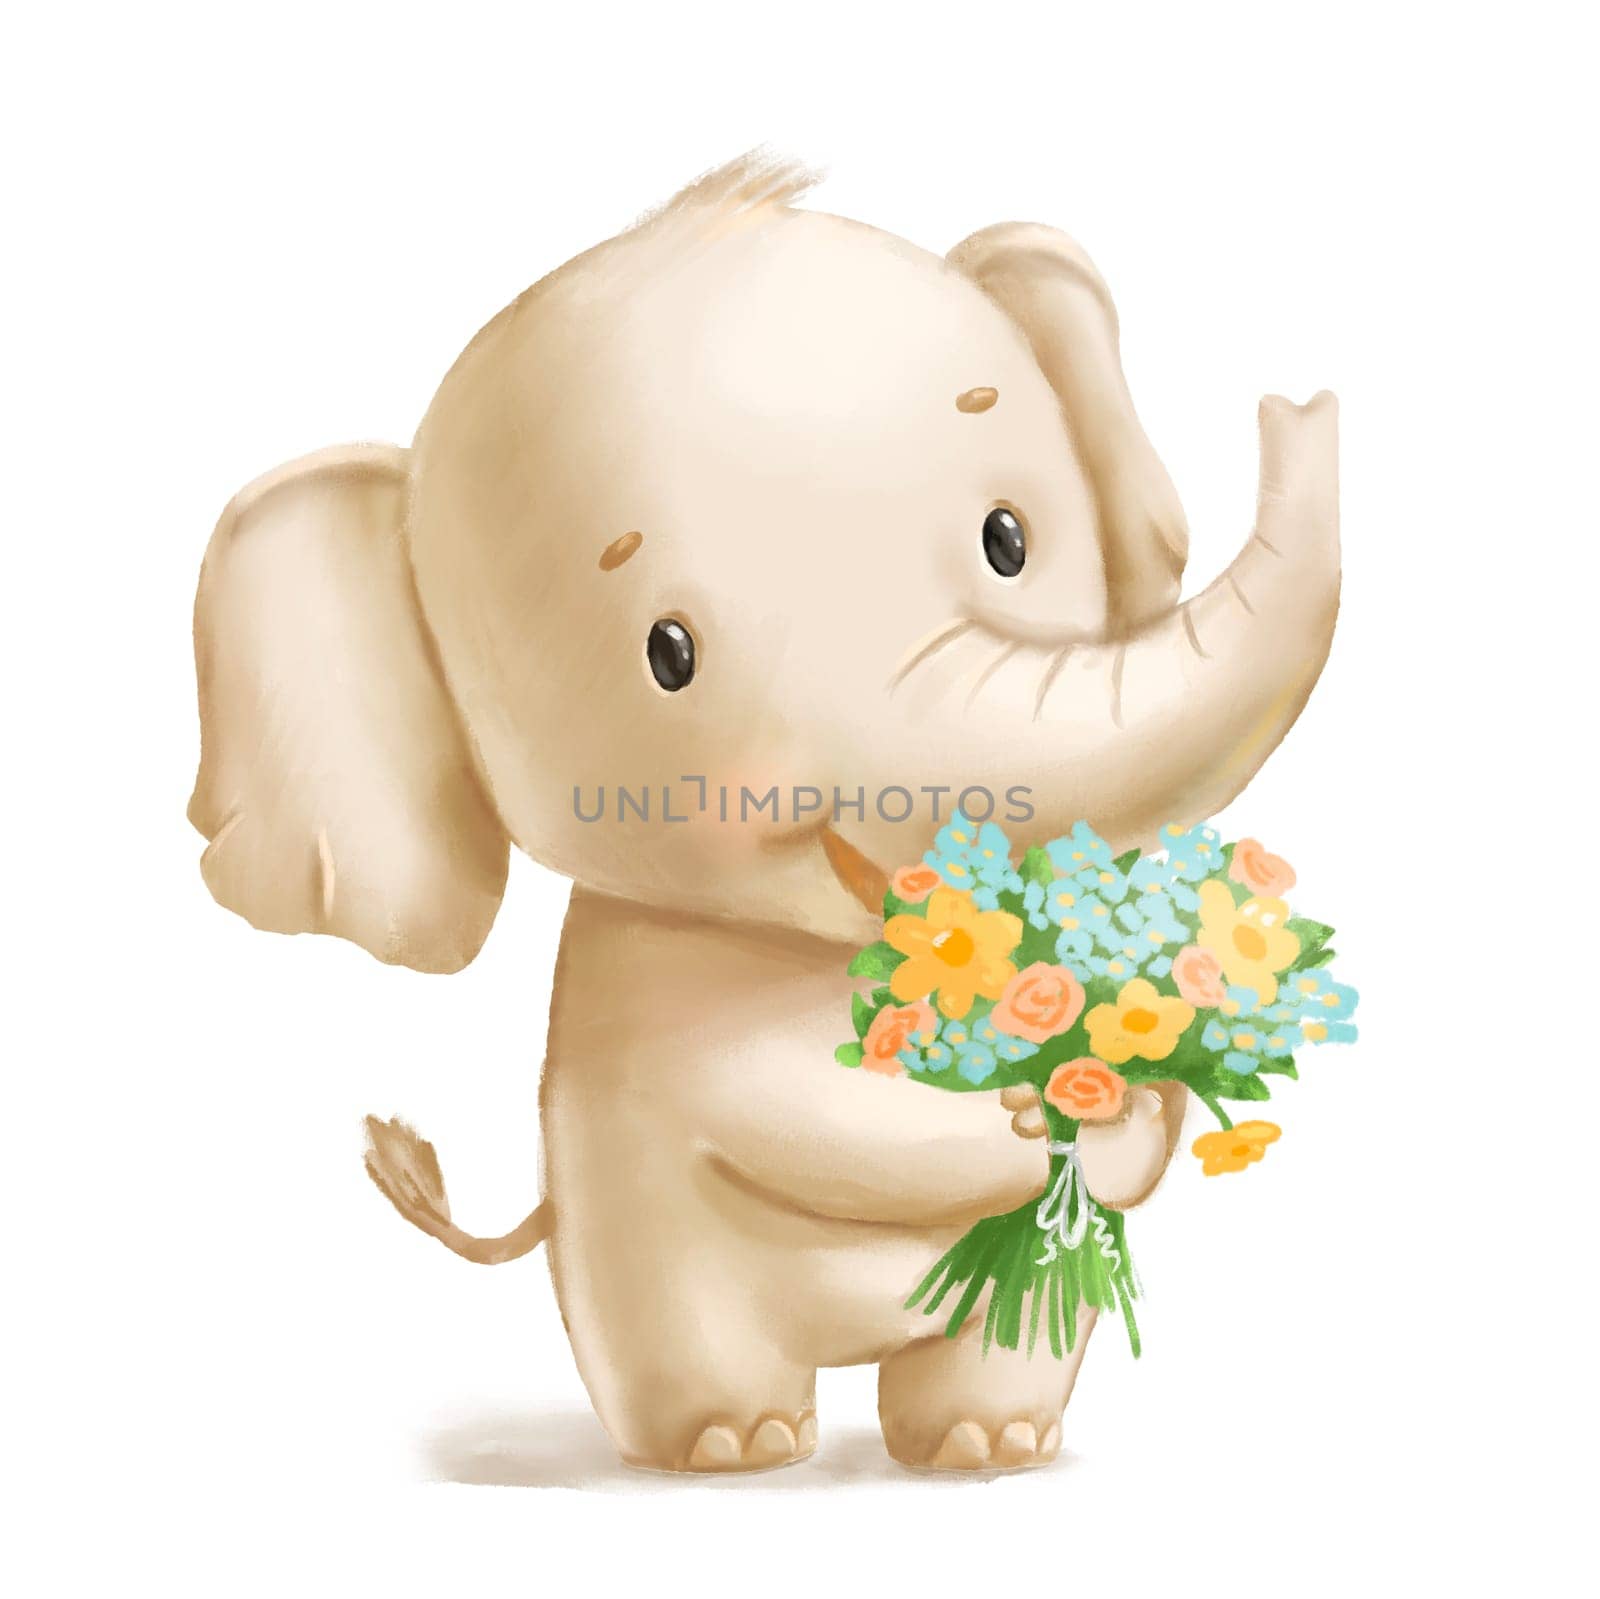 Cute elephant with flowers bouquet. Hand drawn illustration isolated on white. Childish baby animal character.